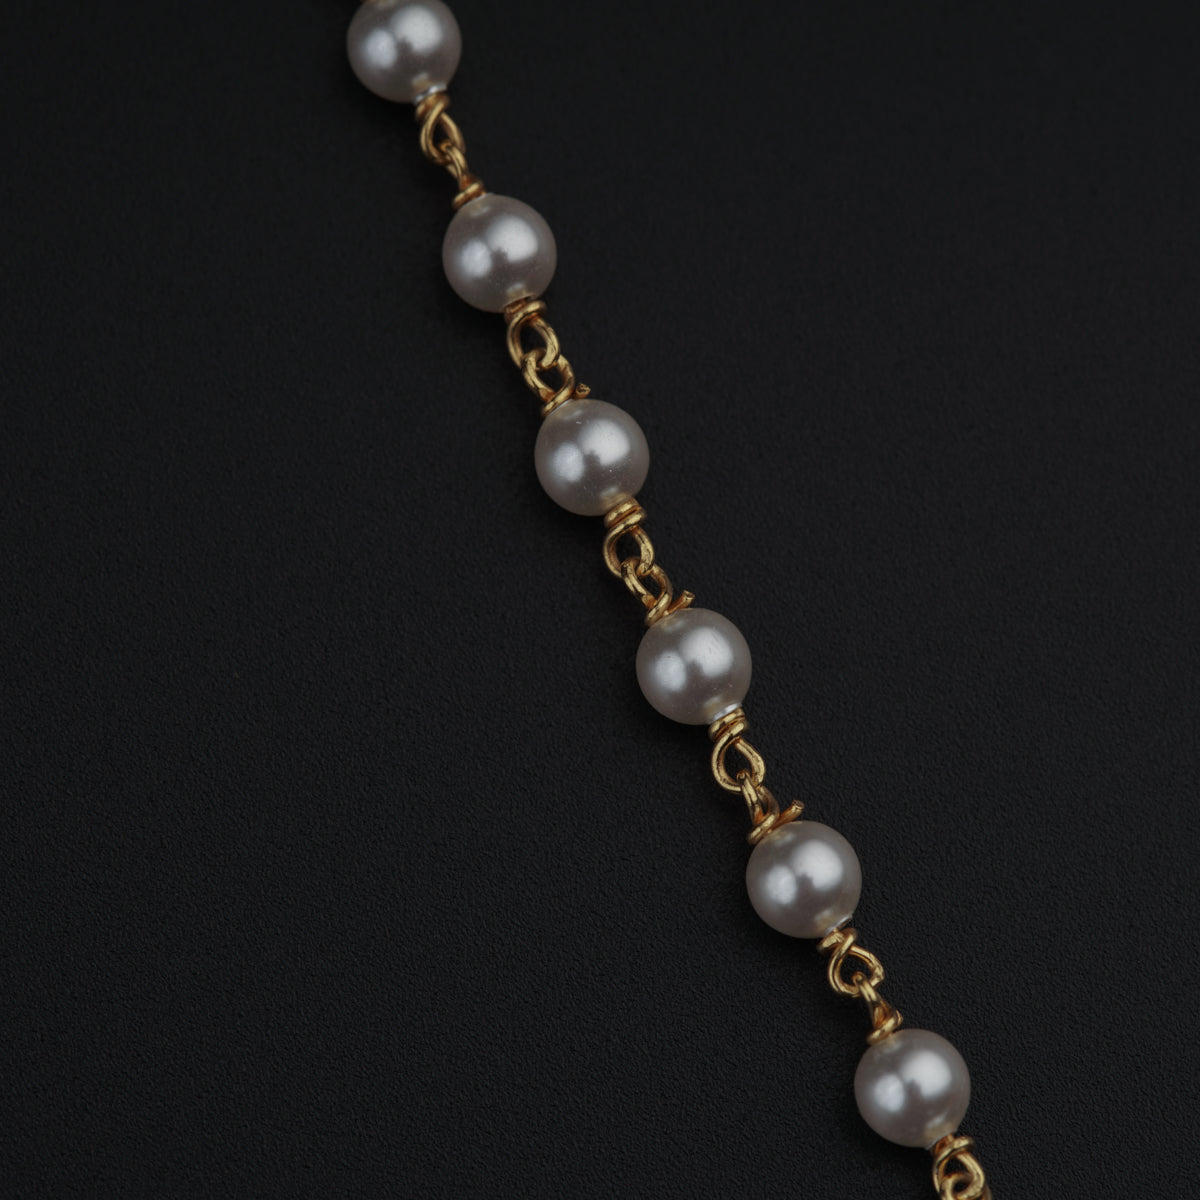 Silver Coin Necklace Gold Plated with Pearls